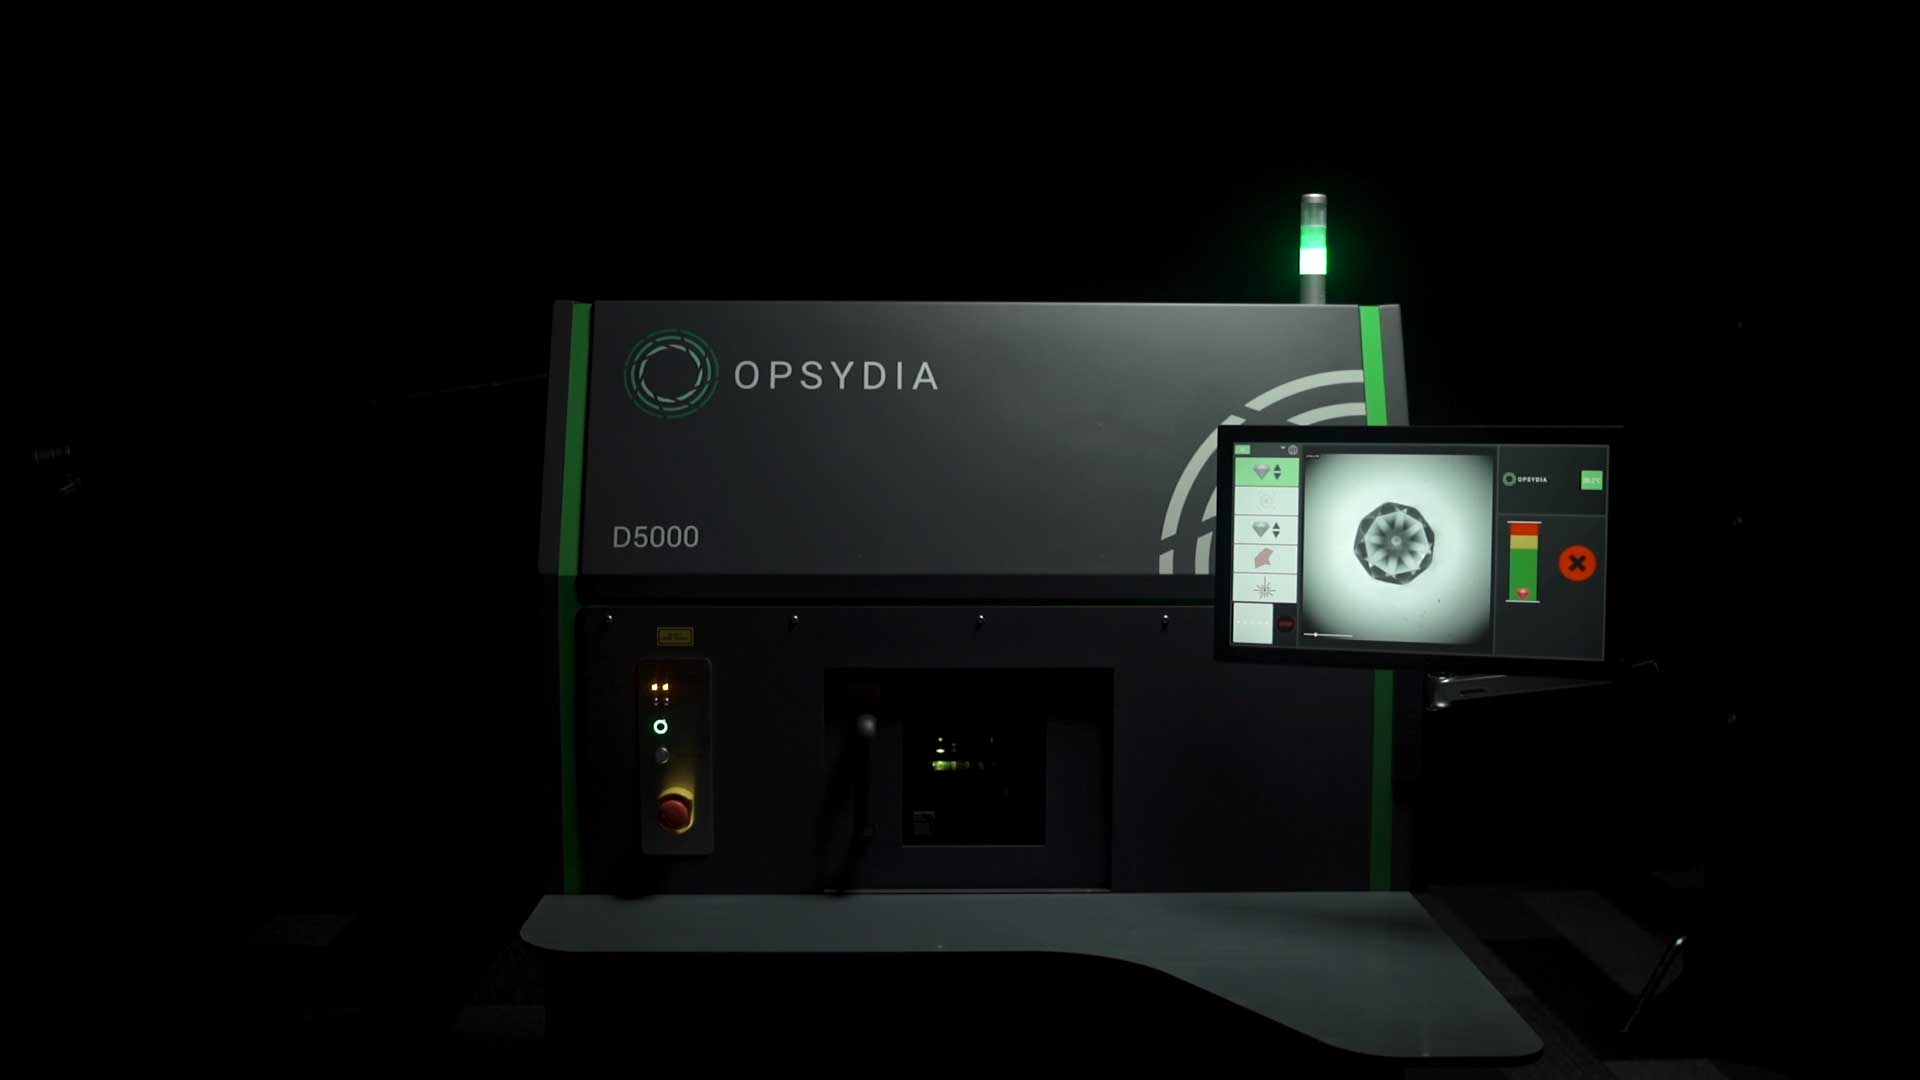 The Opsydia System can be used to place identifiers beneath the surface of diamonds